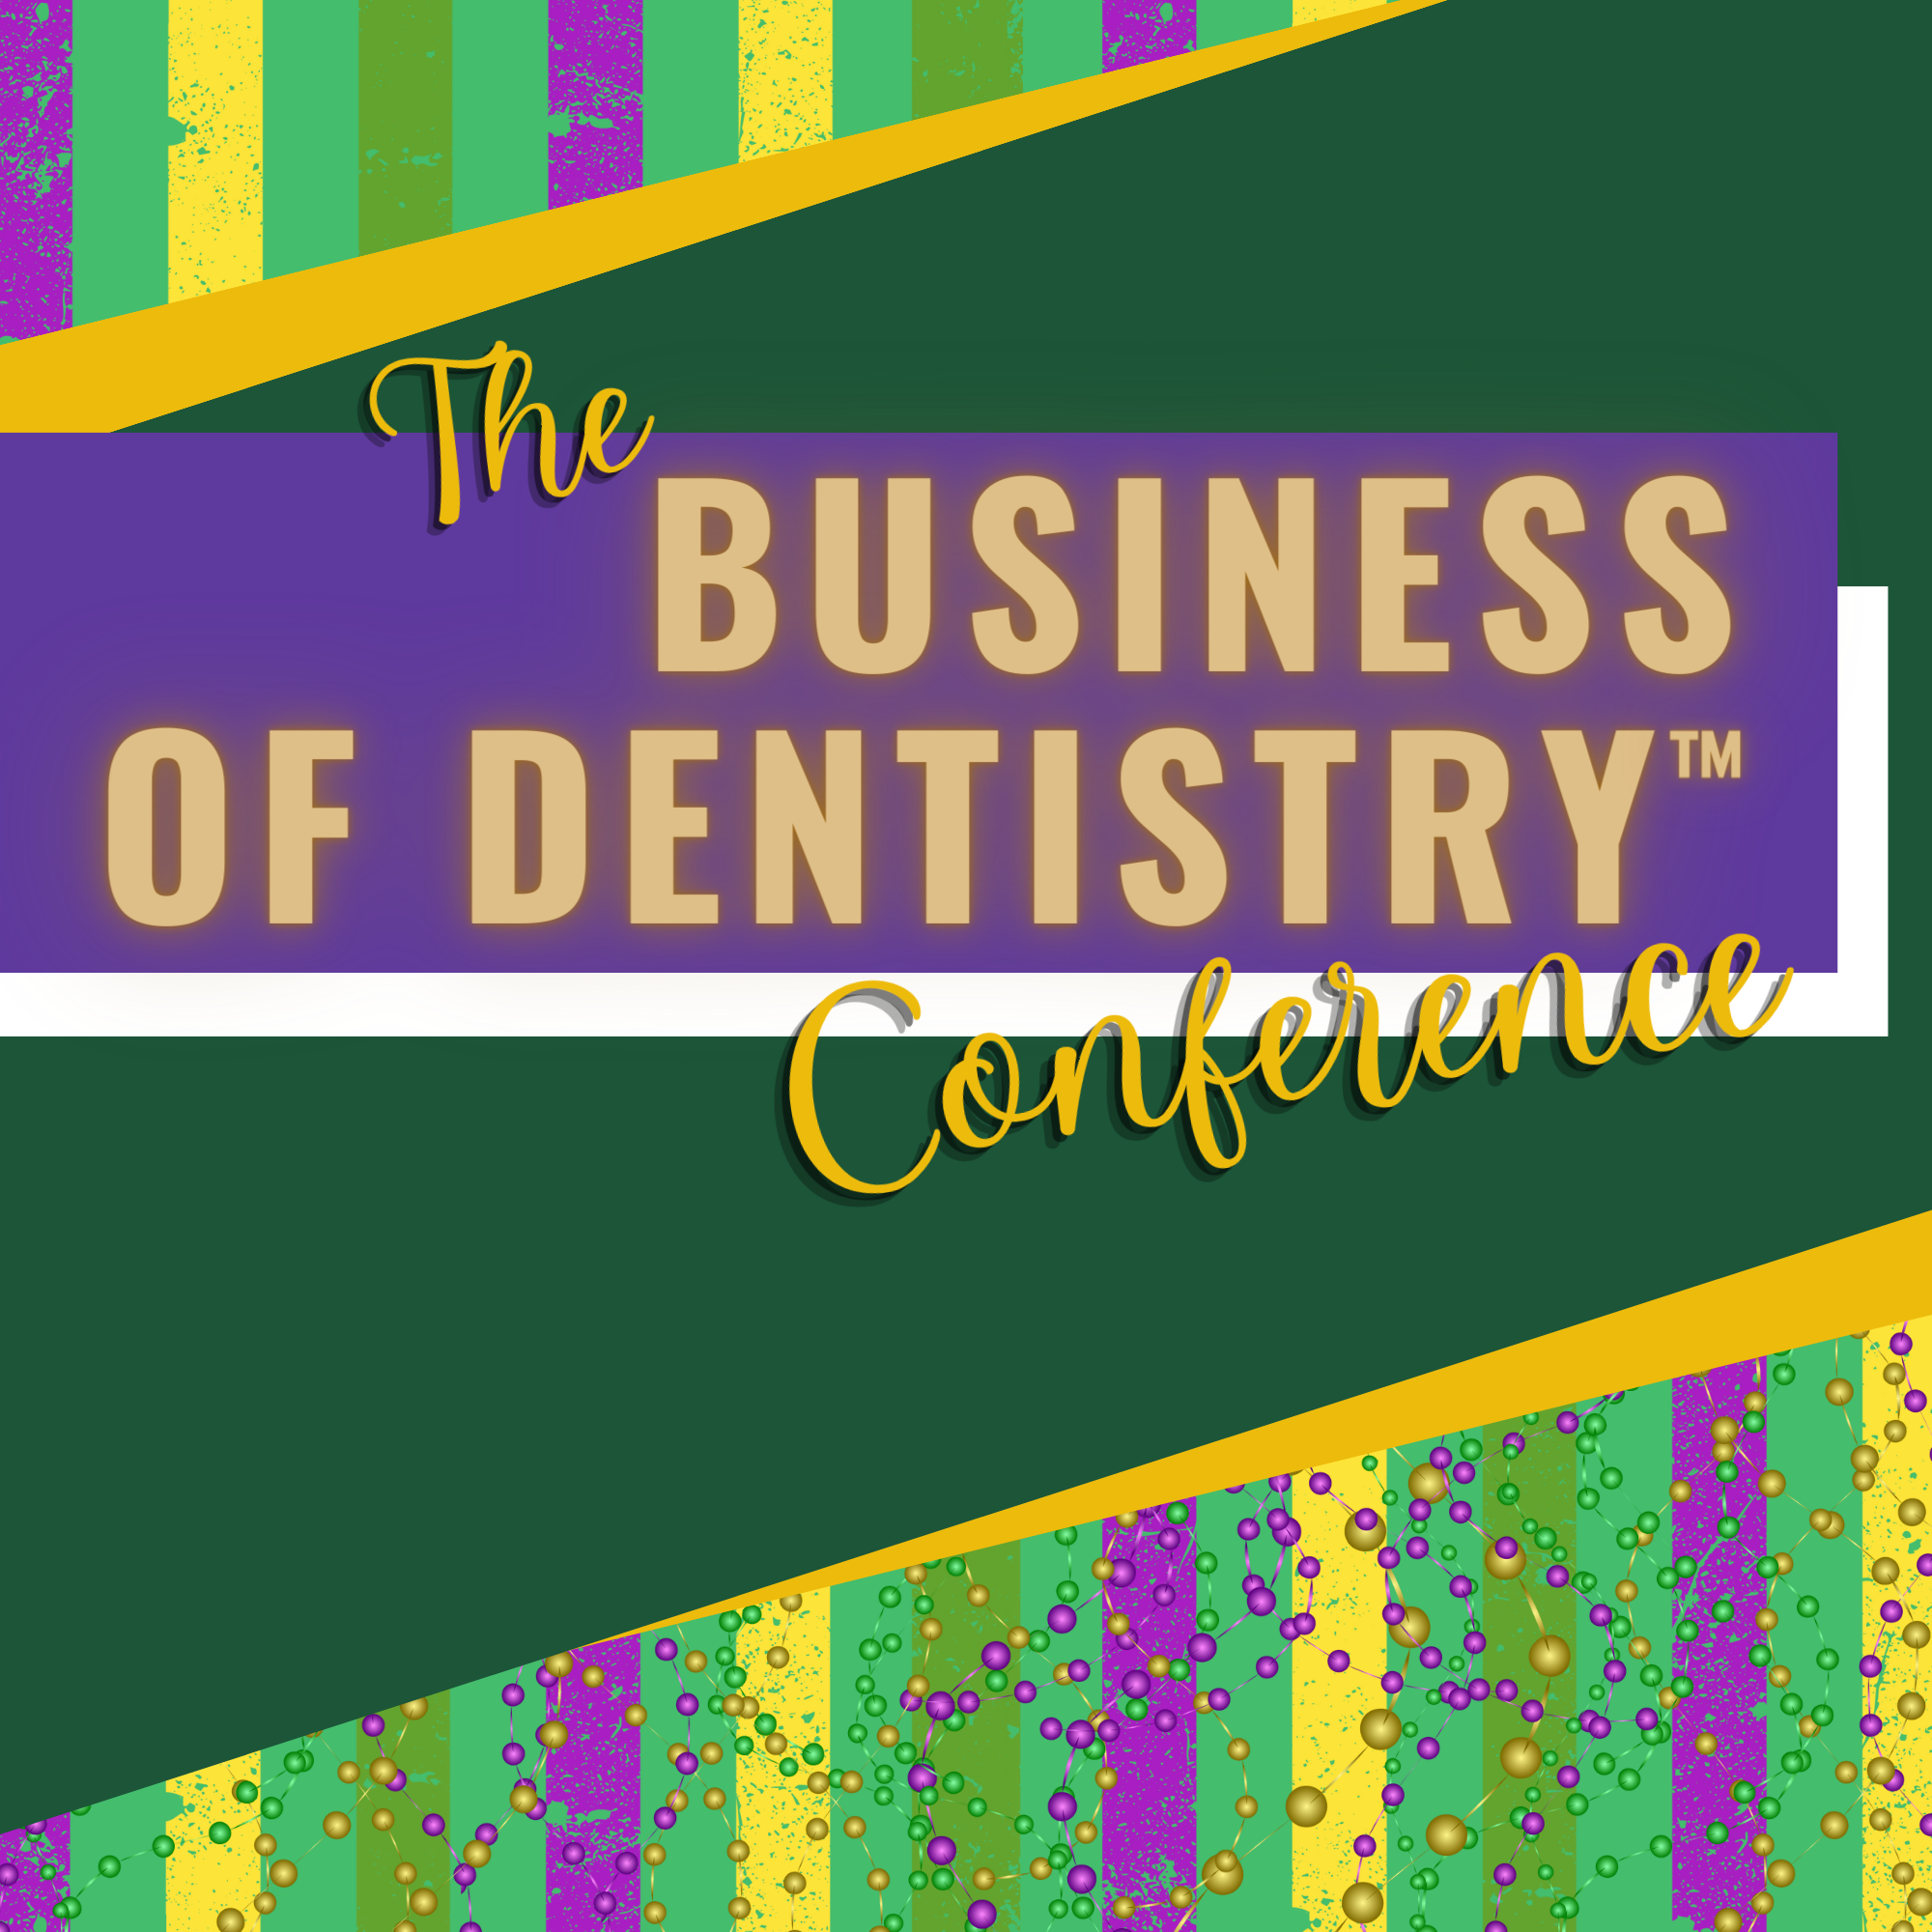 Eleventh conference - The business of dentistry | Learn how protect, promote and grow the business